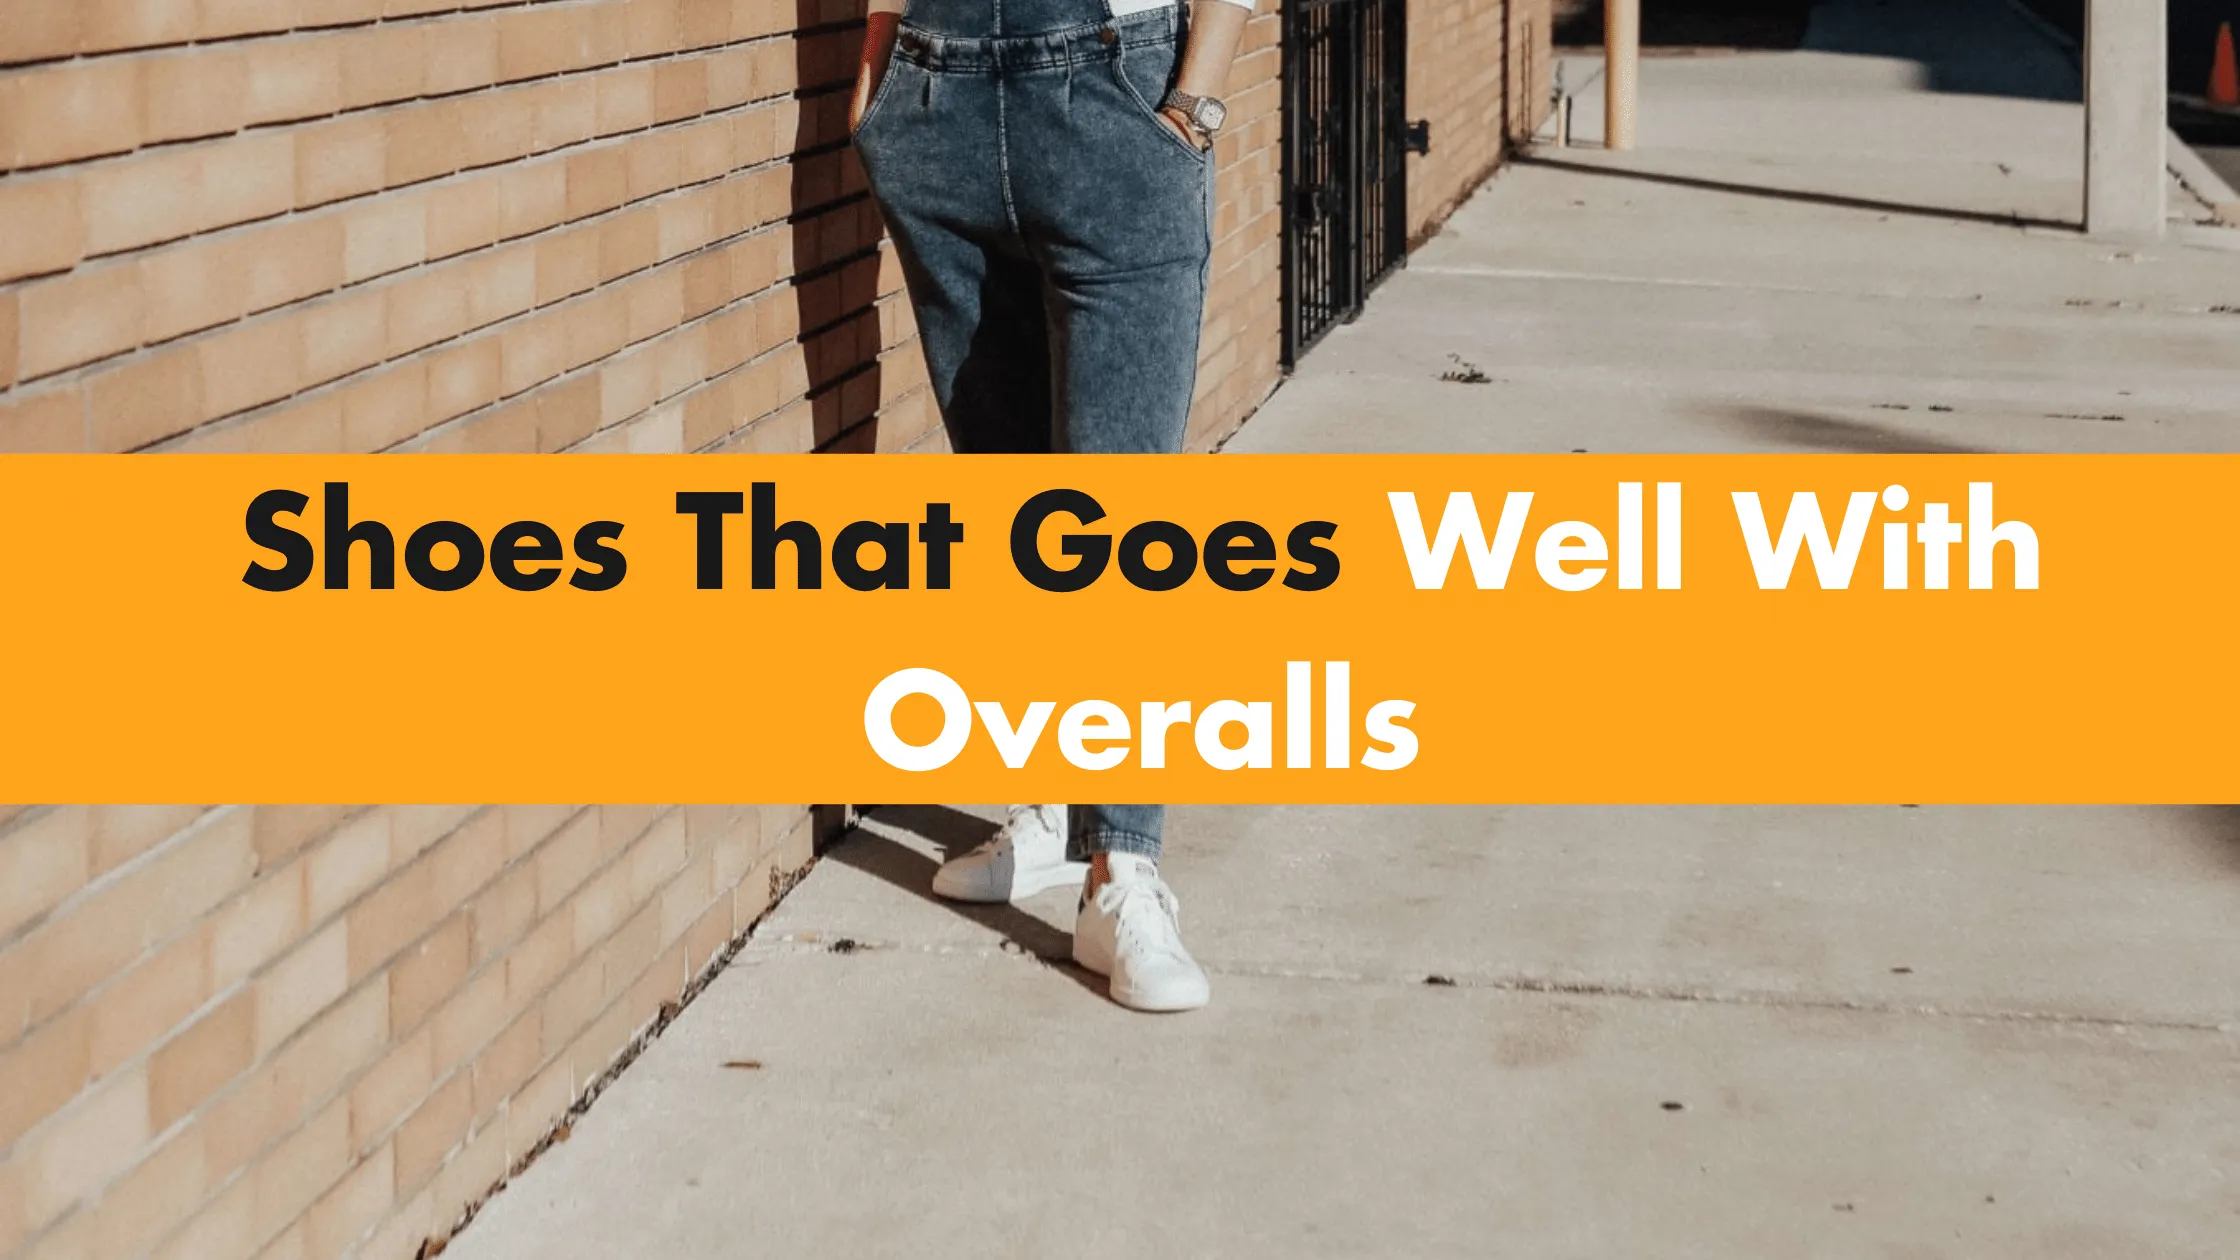 Shoes That Goes Well With Overalls